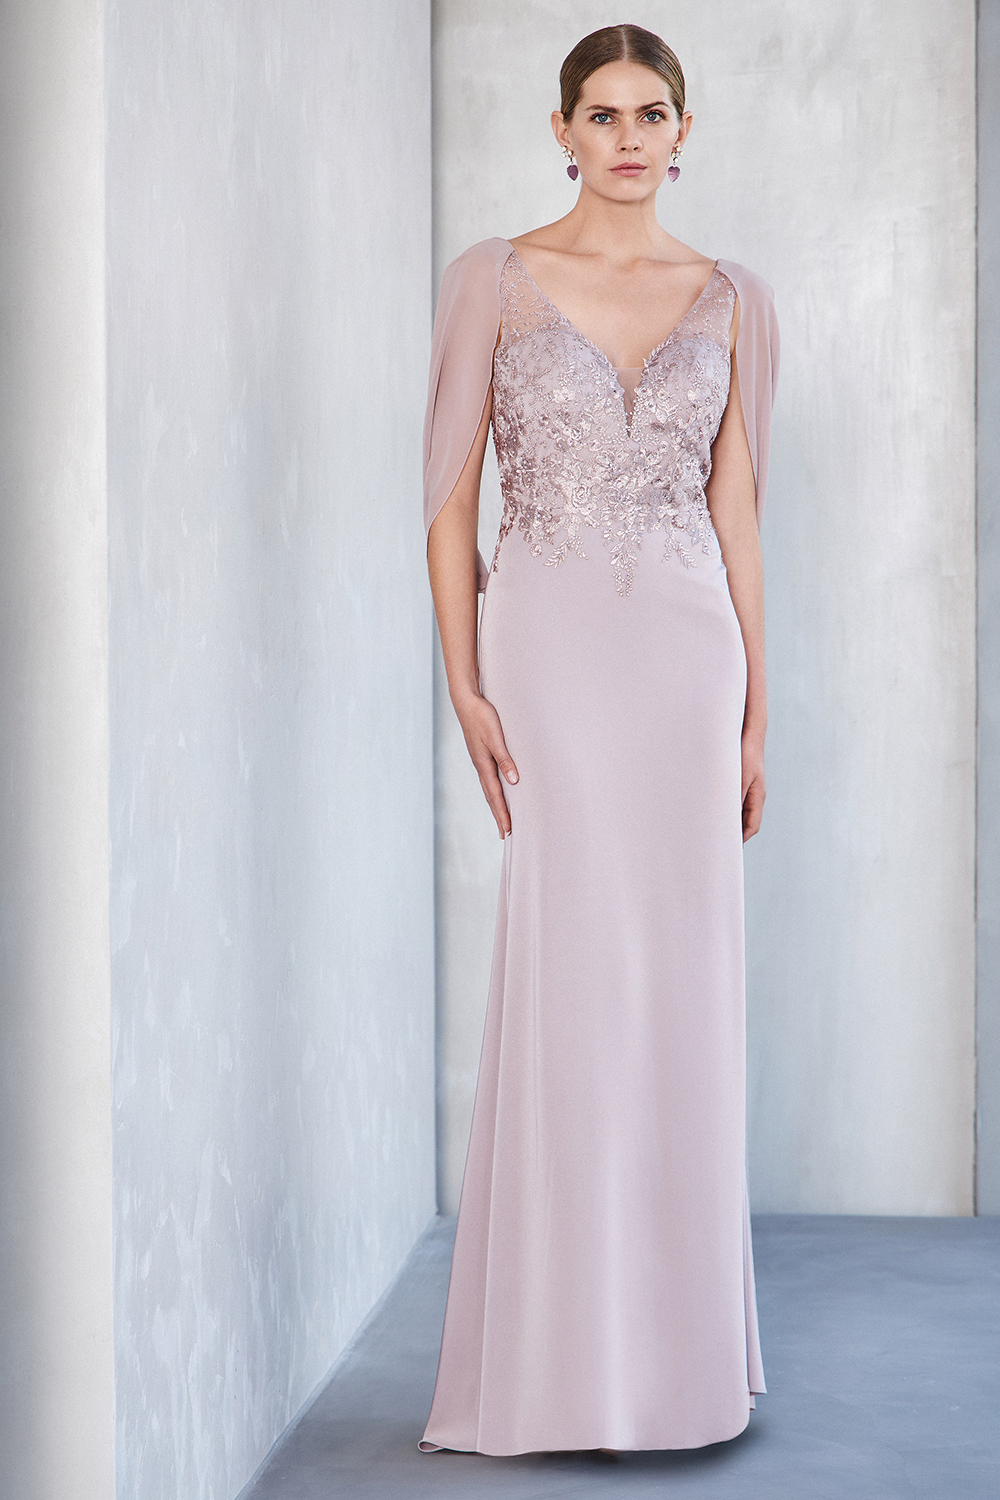 Классические платья / Long evening satin beaded dress with lace top and long sleeves with chiffon